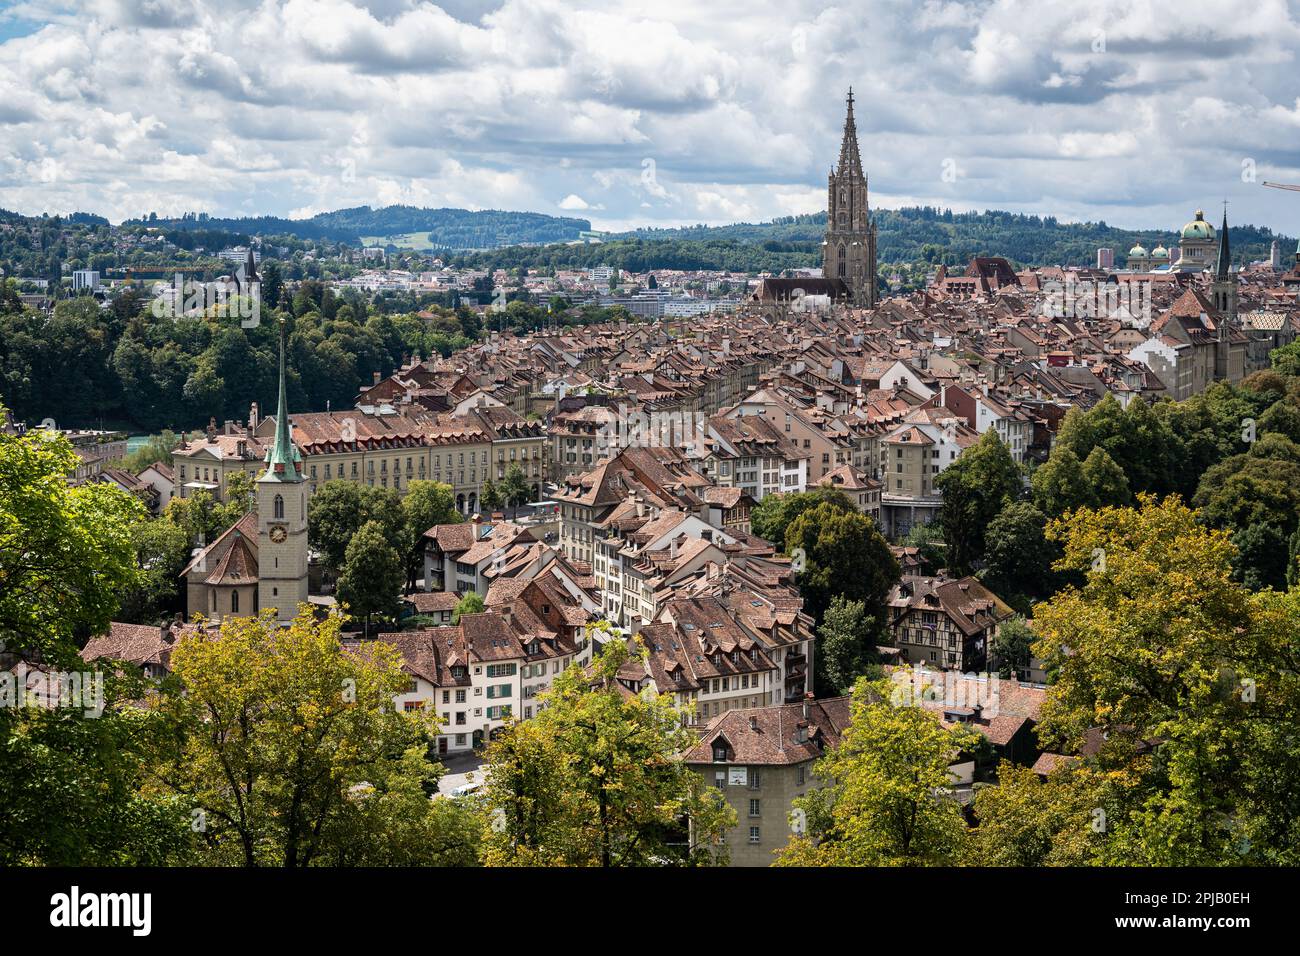 Scenic panoramic view of Bern old town seen from Rose Garden viewpoint, Switzerland Stock Photo